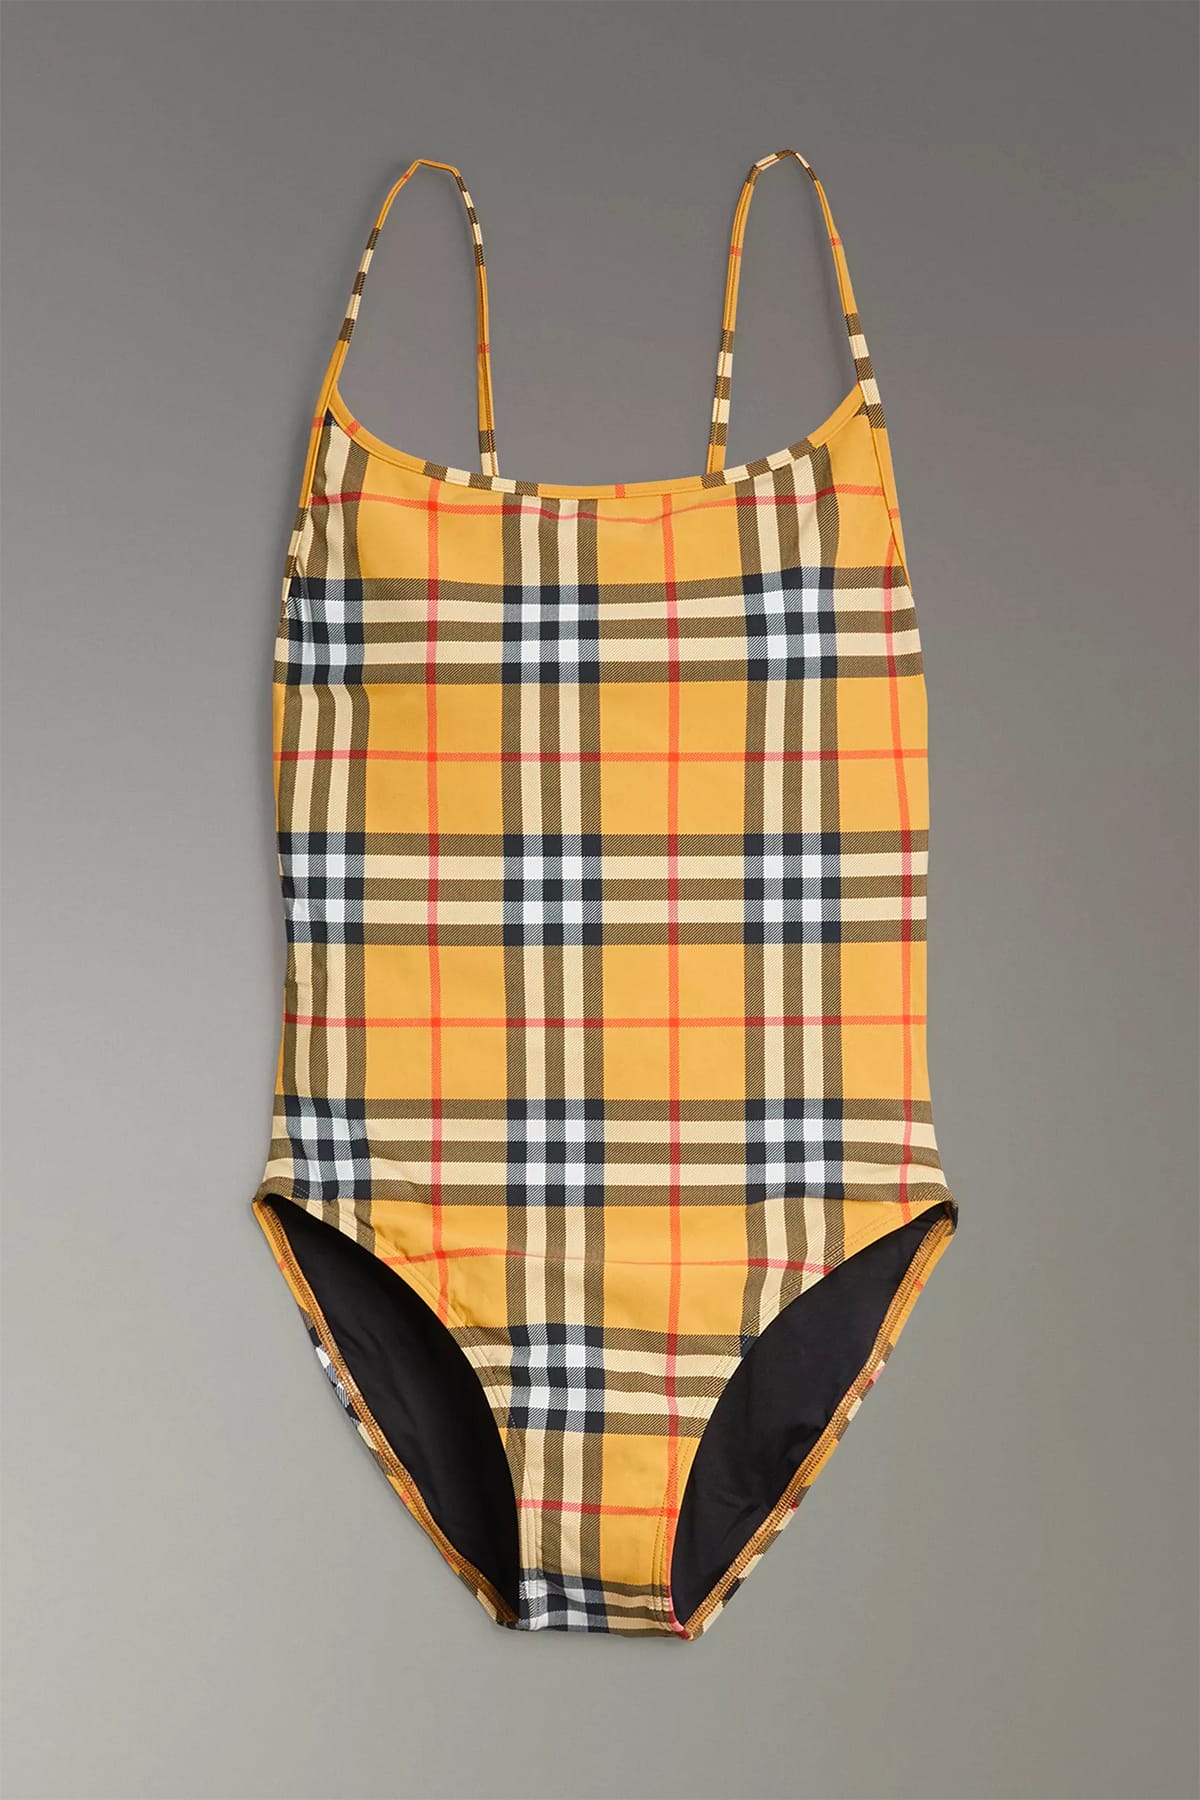 burberry swimming suit